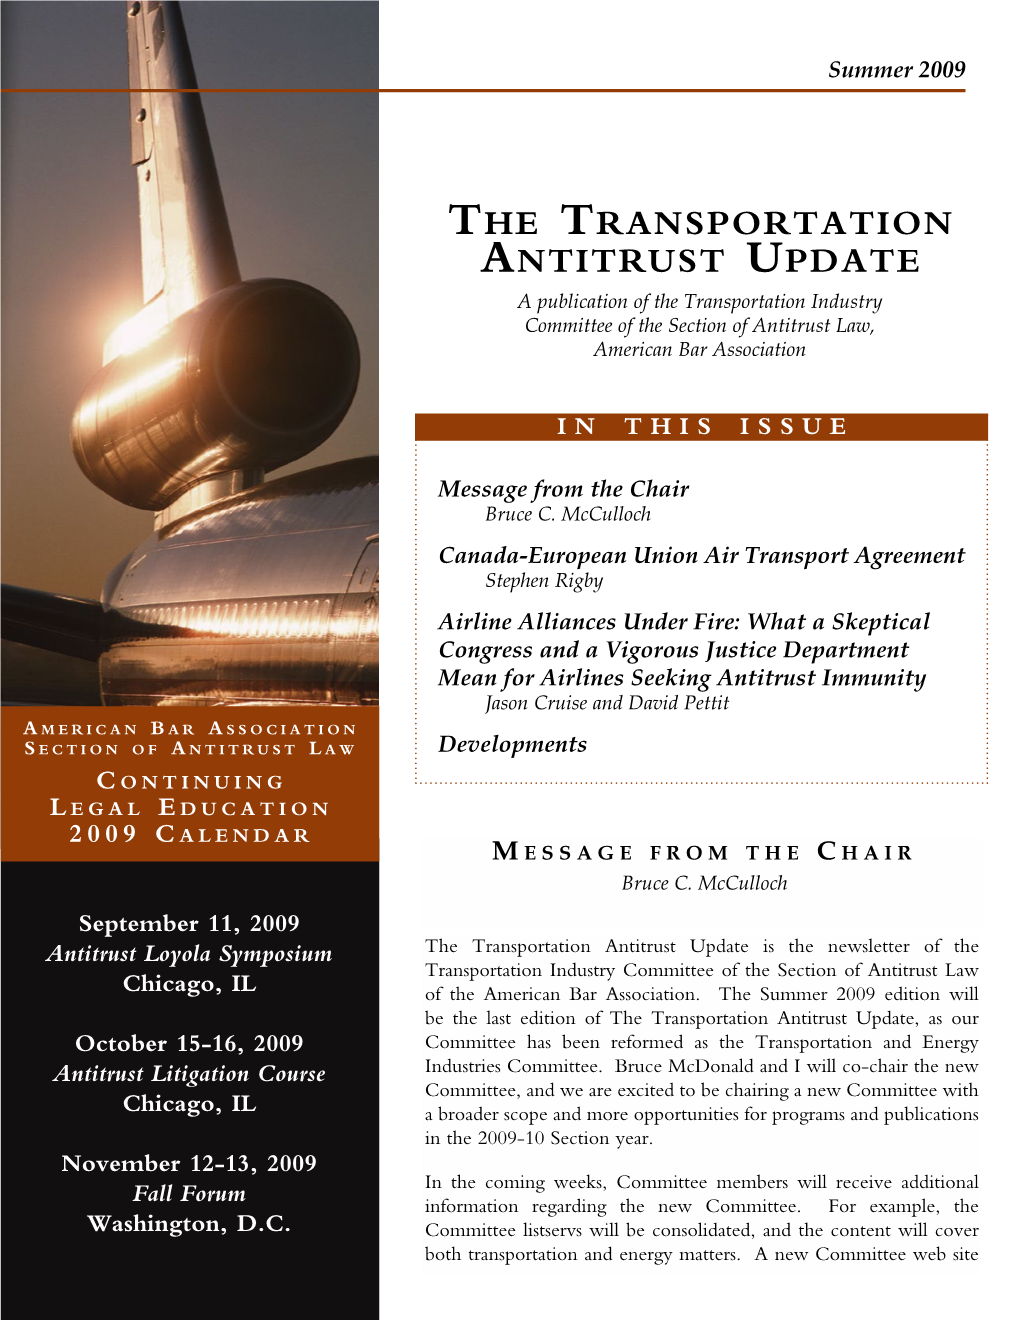 The Transportation Antitrust Update a Publication of the Transportation Industry Committee of the Section of Antitrust Law, American Bar Association